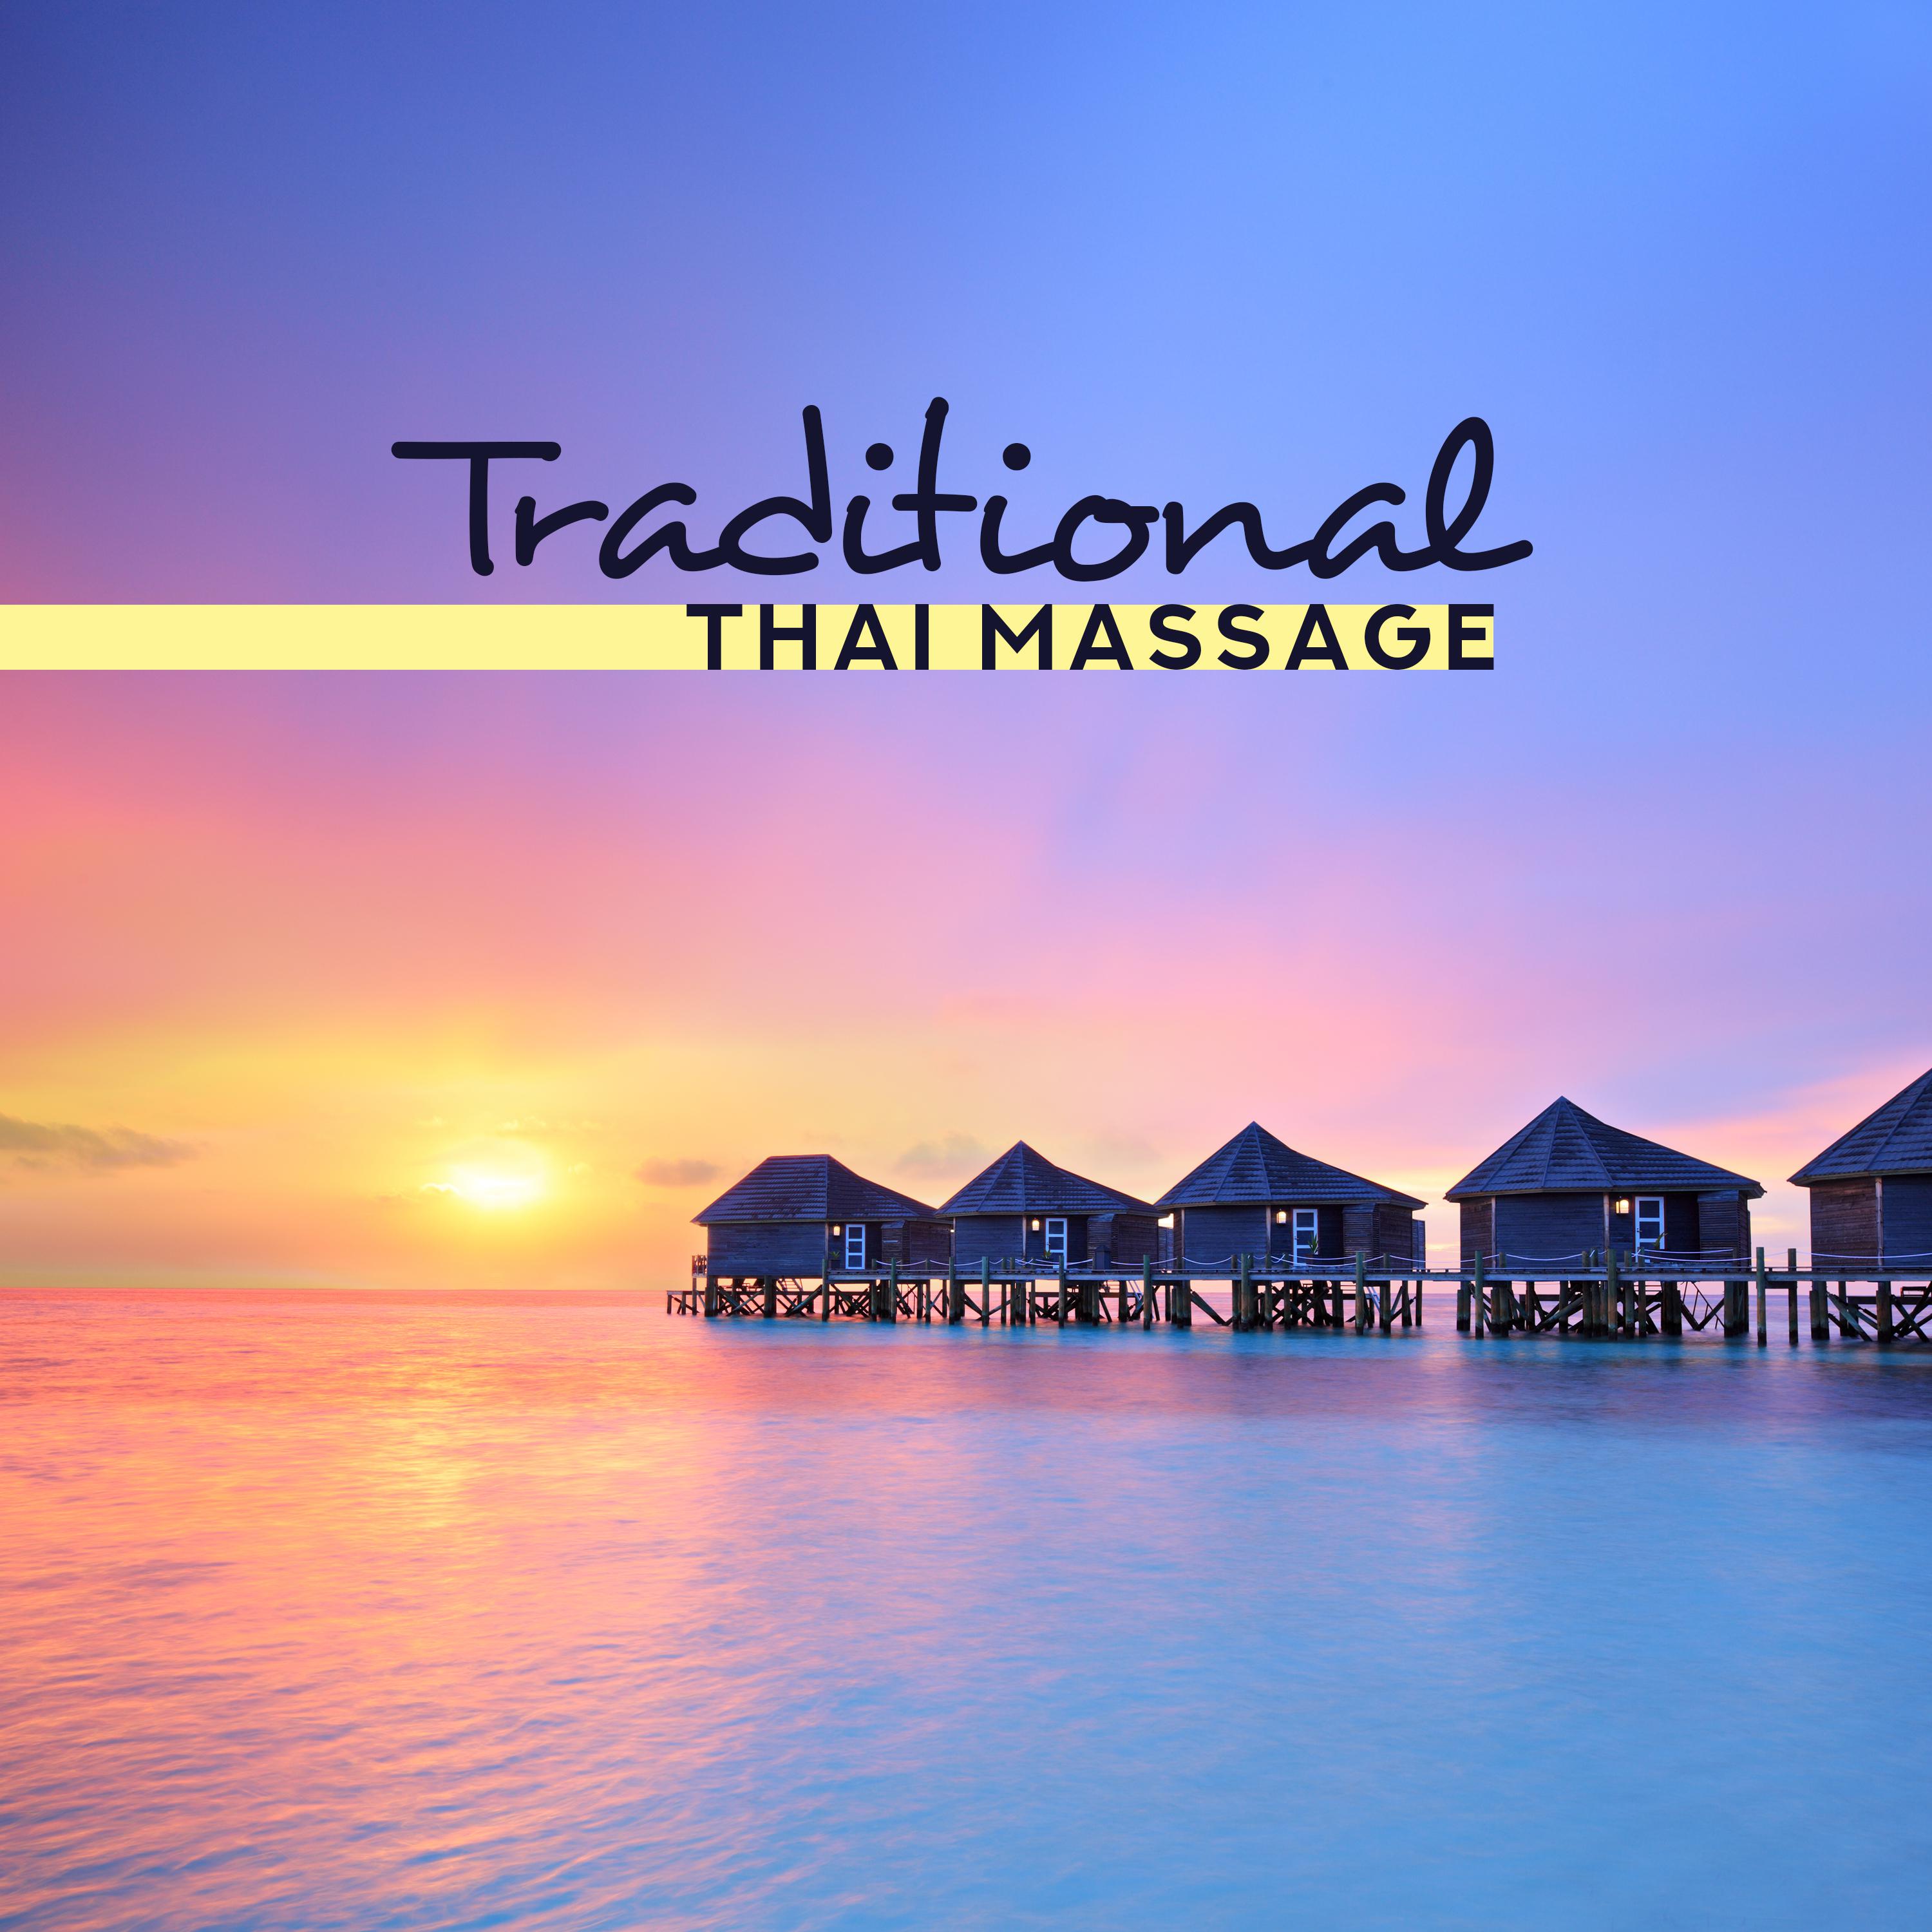 Traditional Thai Massage (Zen Time, New Age Spa Collection 2019, Elixir of Beauty & Calmness, Sensitive Relaxation, Discover Your Senses)